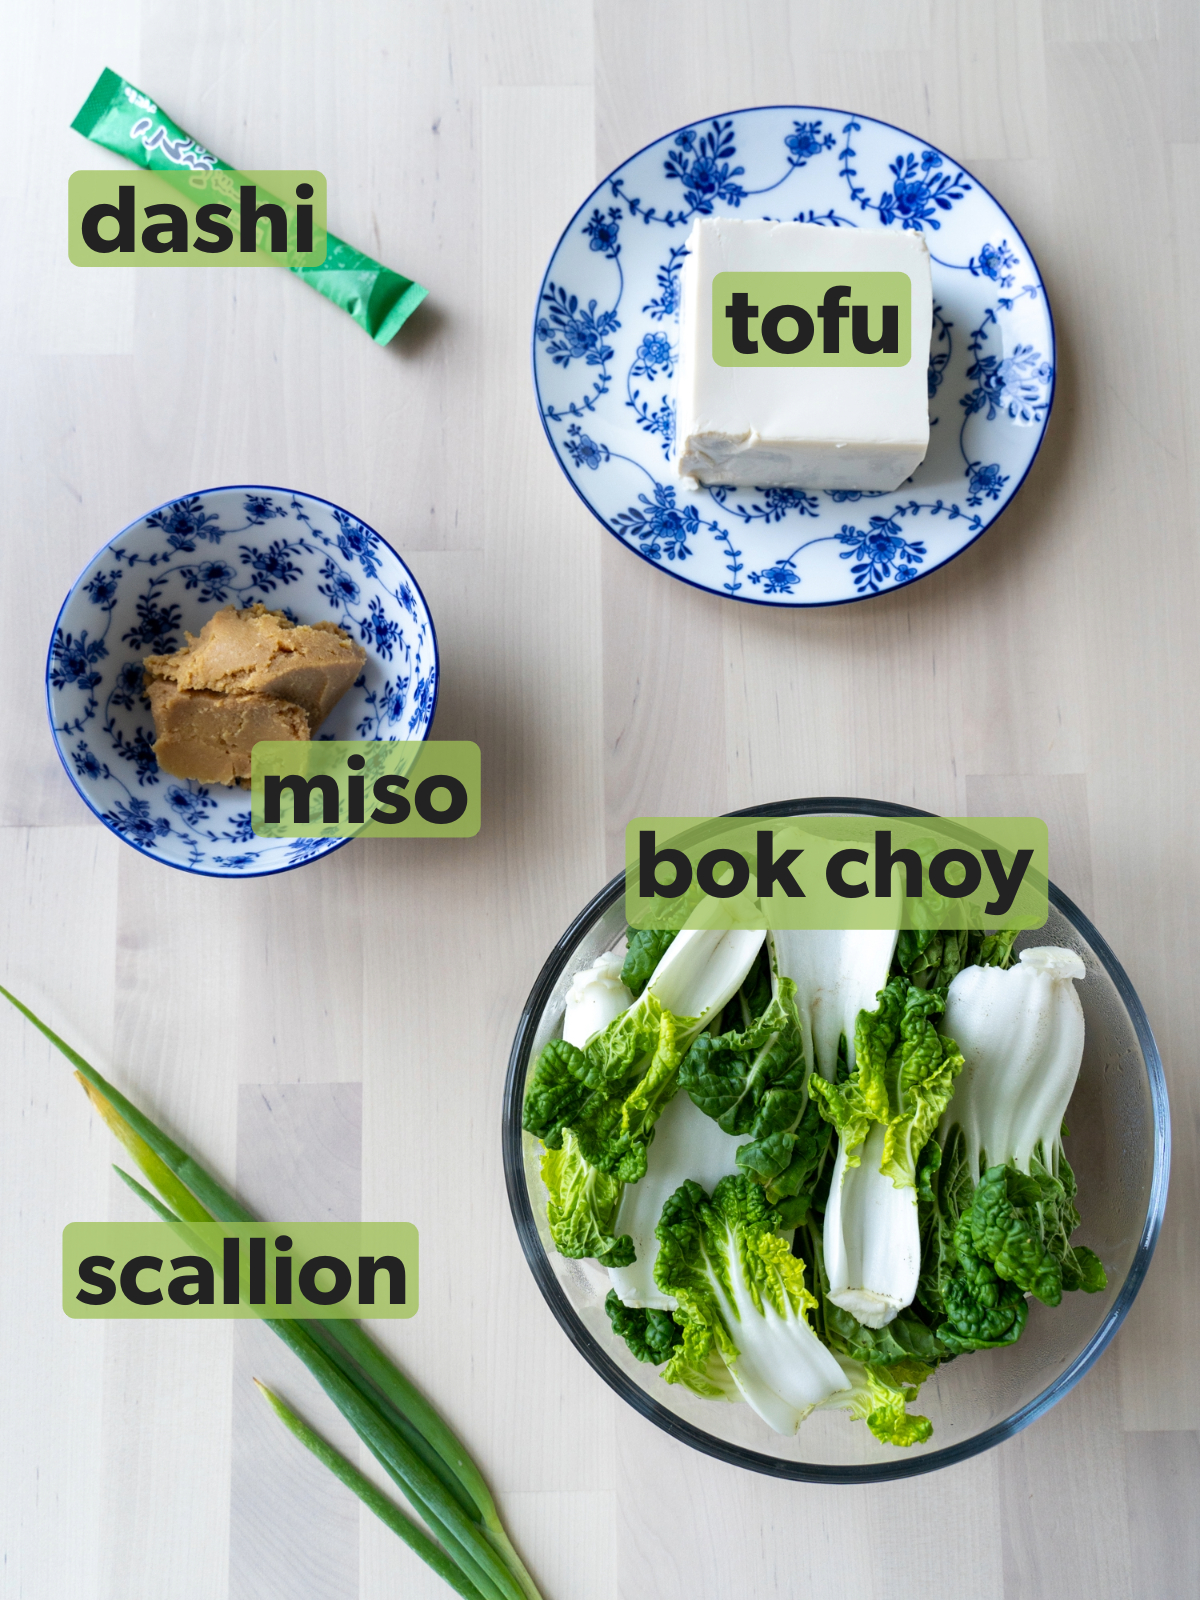 Ingredients for bok choy miso soup are laid out on a wooden table.